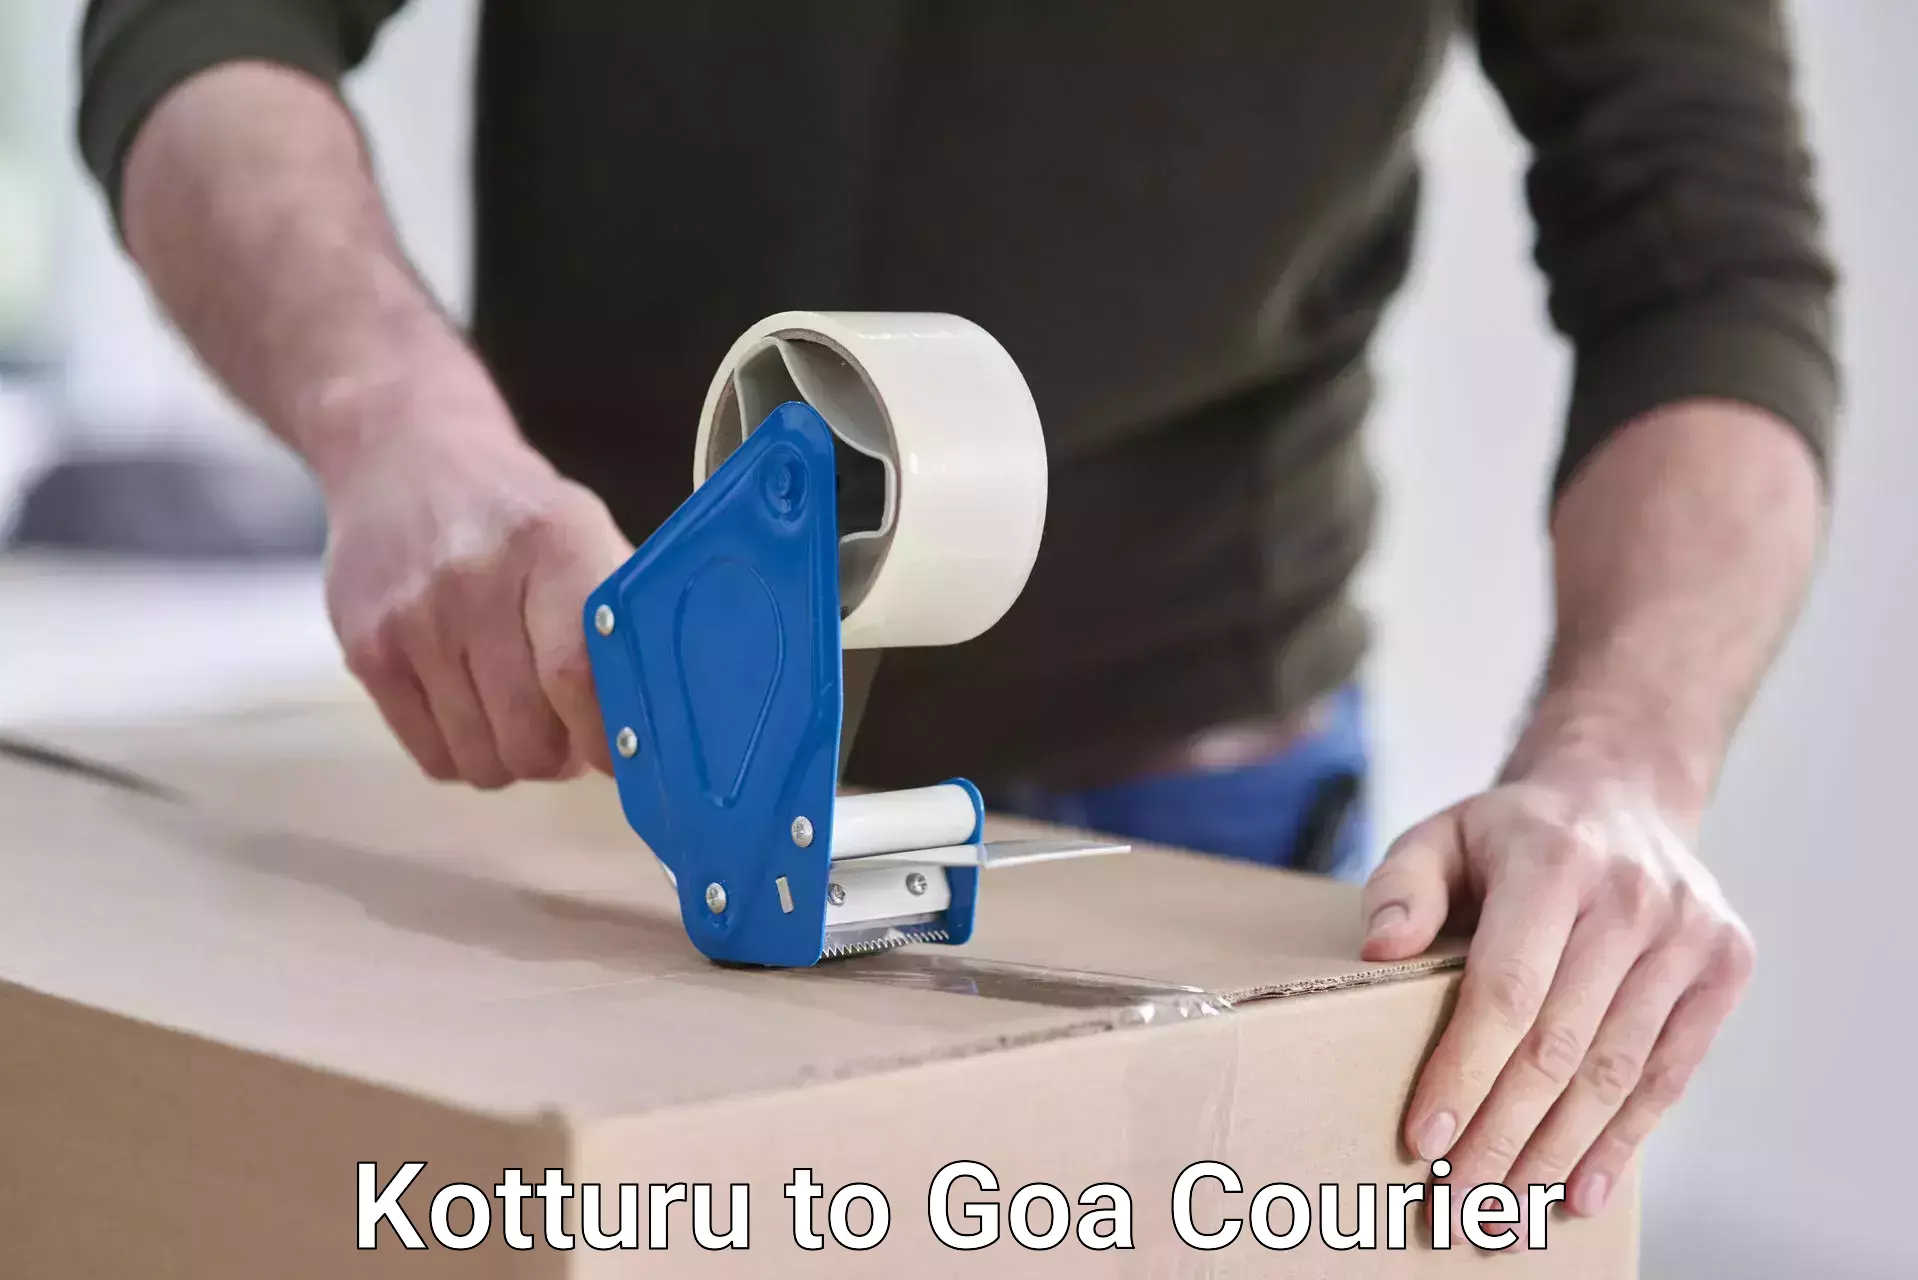 Personal courier services Kotturu to Goa